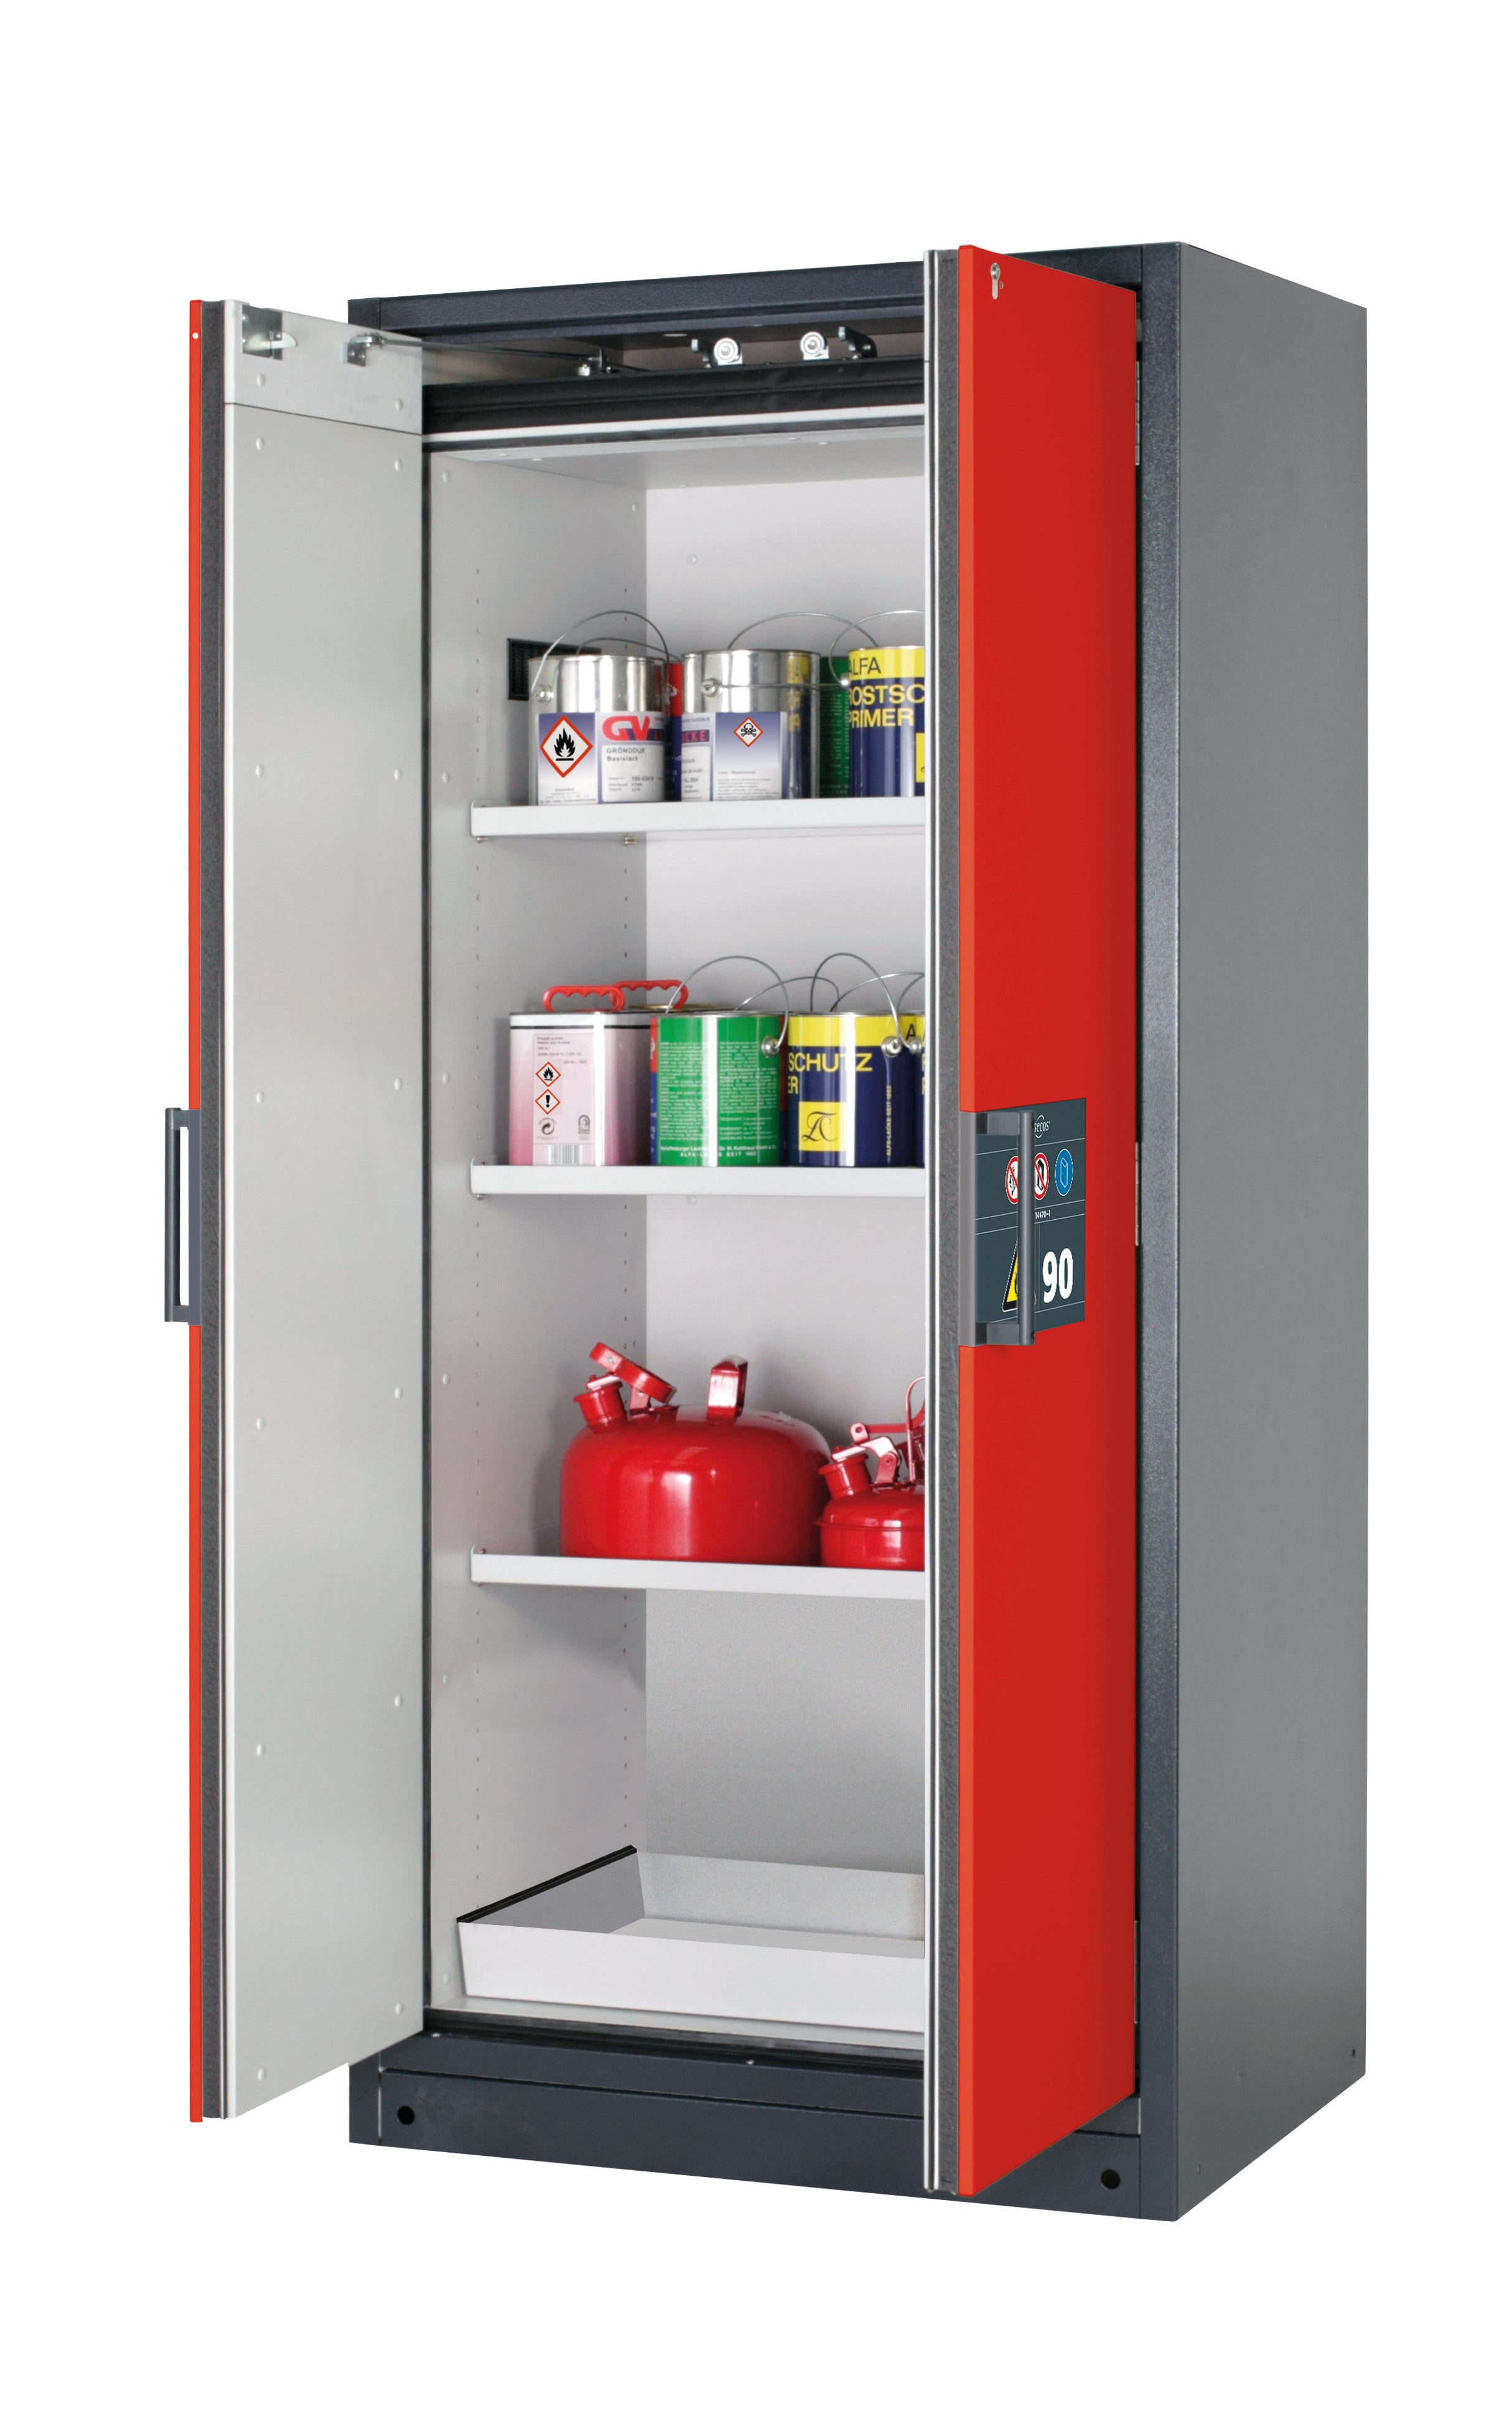 Type 90 safety storage cabinet Q-CLASSIC-90 model Q90.195.090 in traffic red RAL 3020 with 3x shelf standard (sheet steel),